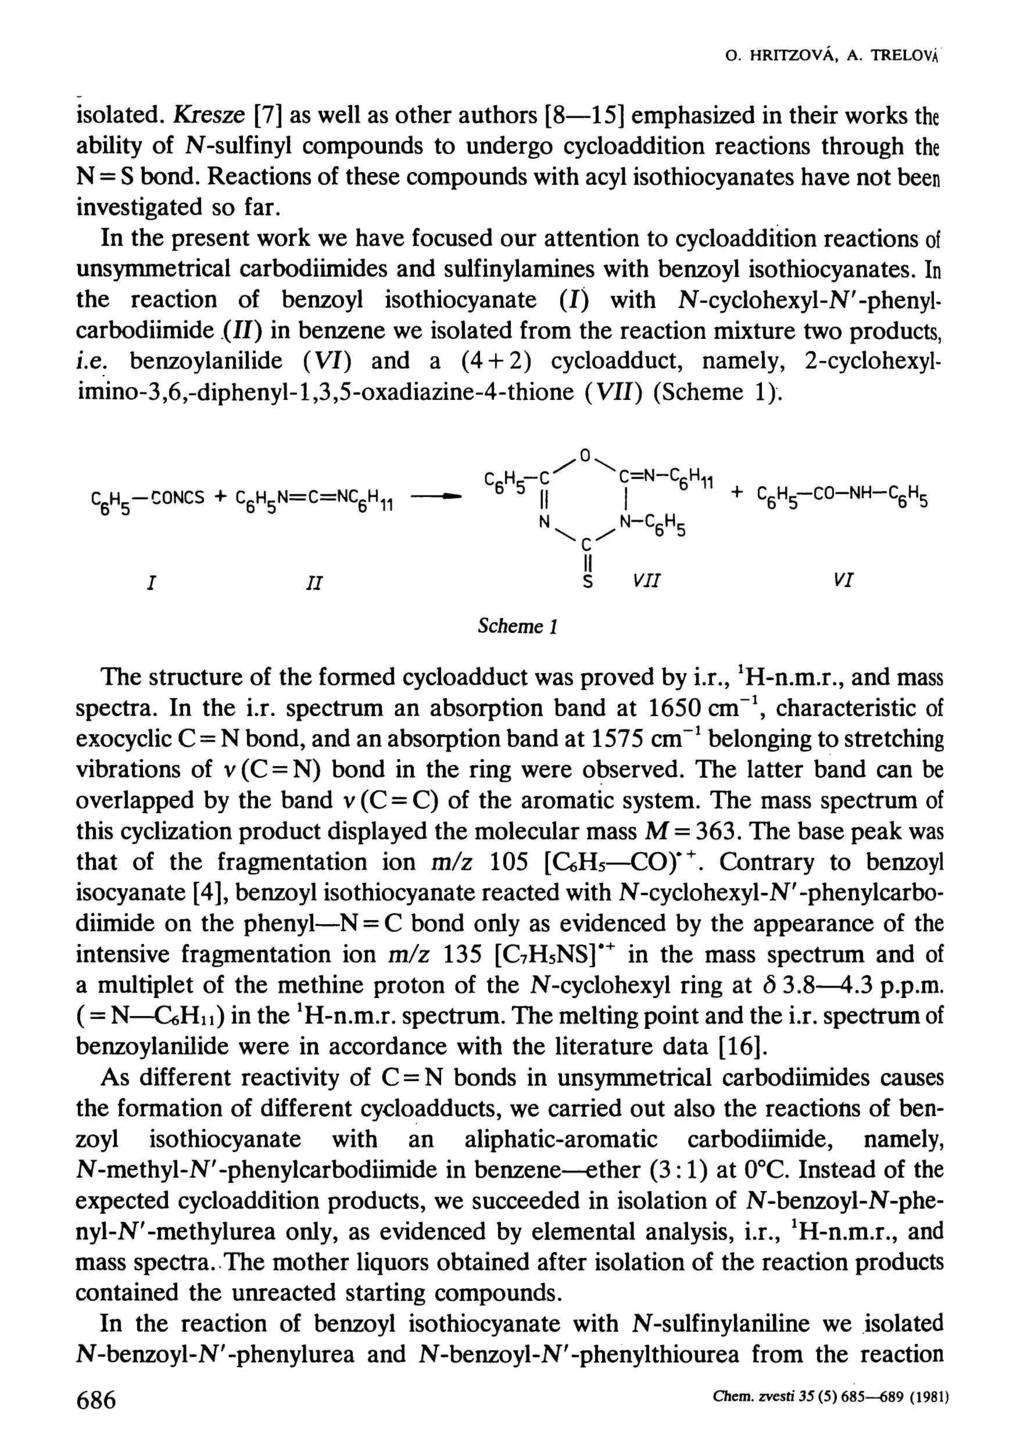 O. HRITZOVÁ, A. TRELOVÁ isolated. Kresze [7] as well as other authors [8 15] emphasized in their works the ability of N-sulfinyl compounds to undergo cycloaddition reactions through the N = S bond.